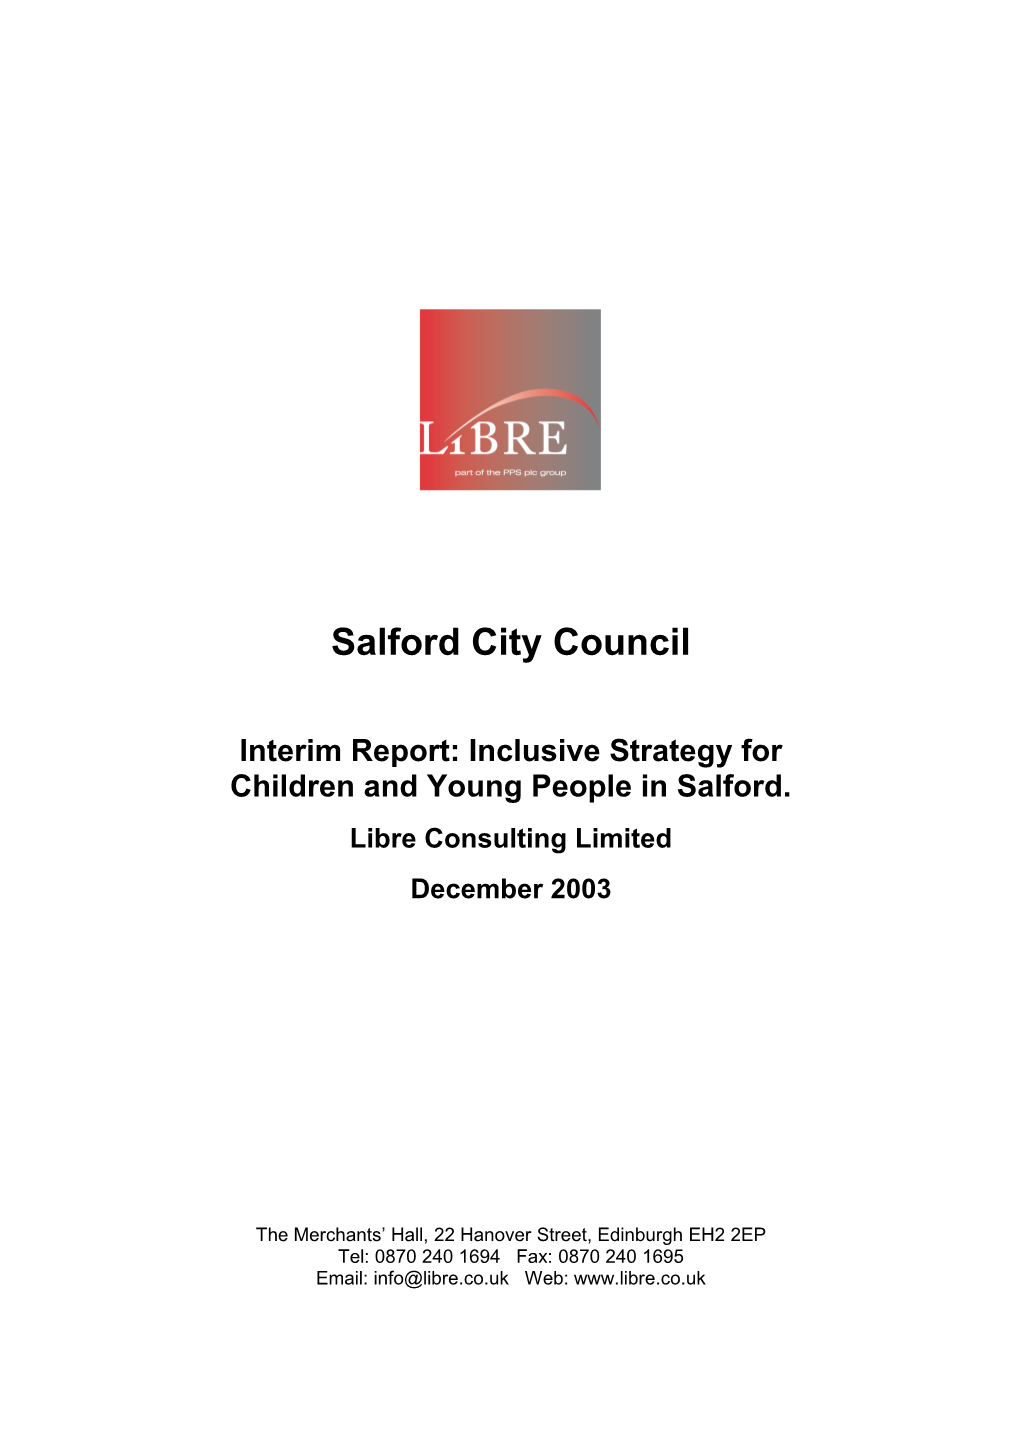 Salford City Council: Strategy for Youth in Salford